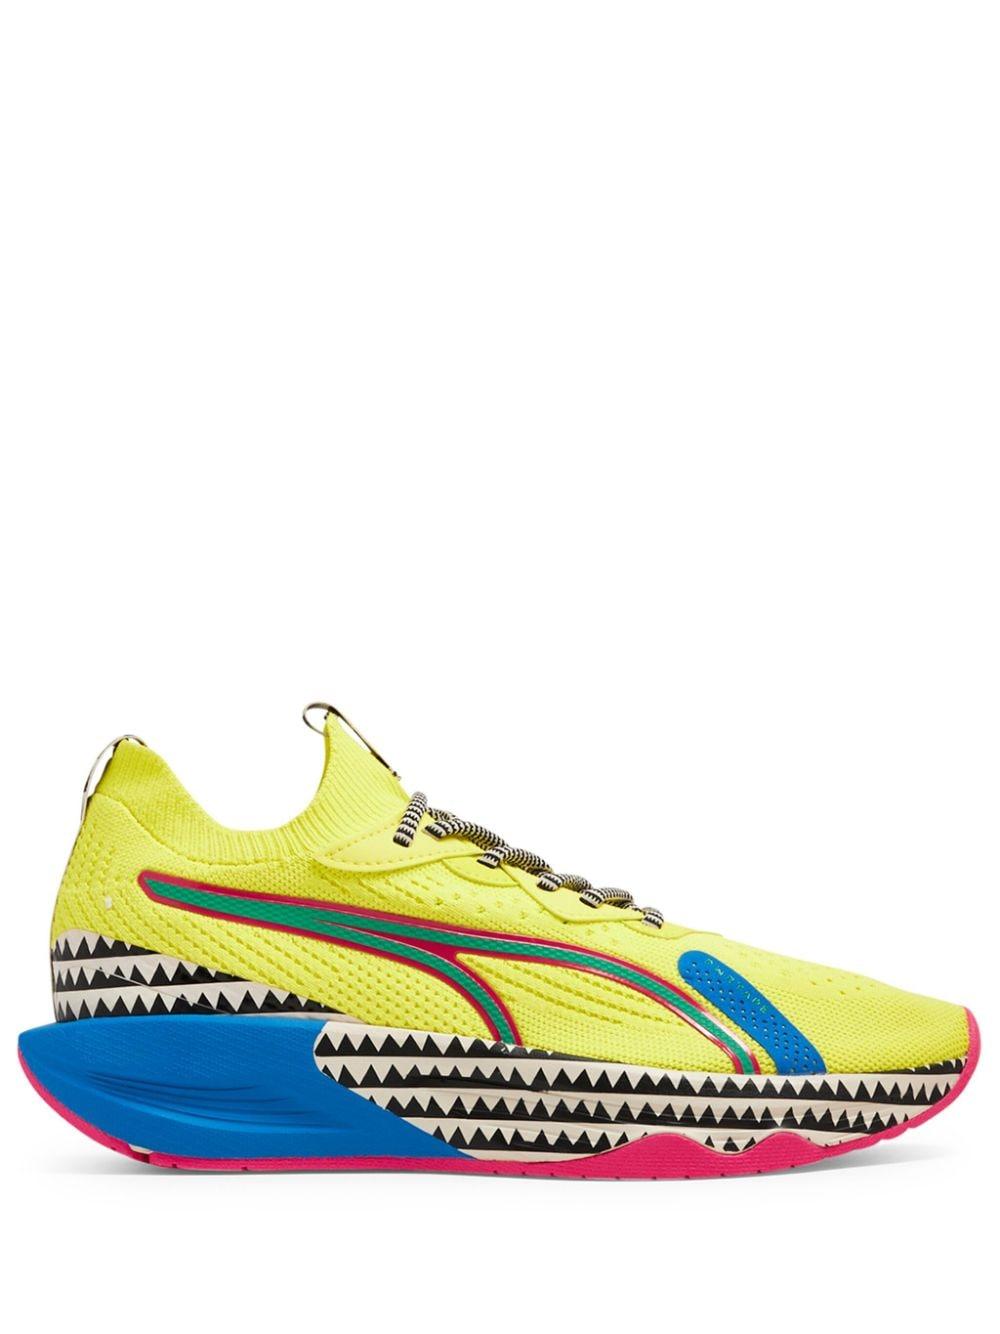 PUMA X Lemlem Nitro Luxe Sneakers in Yellow | Lyst